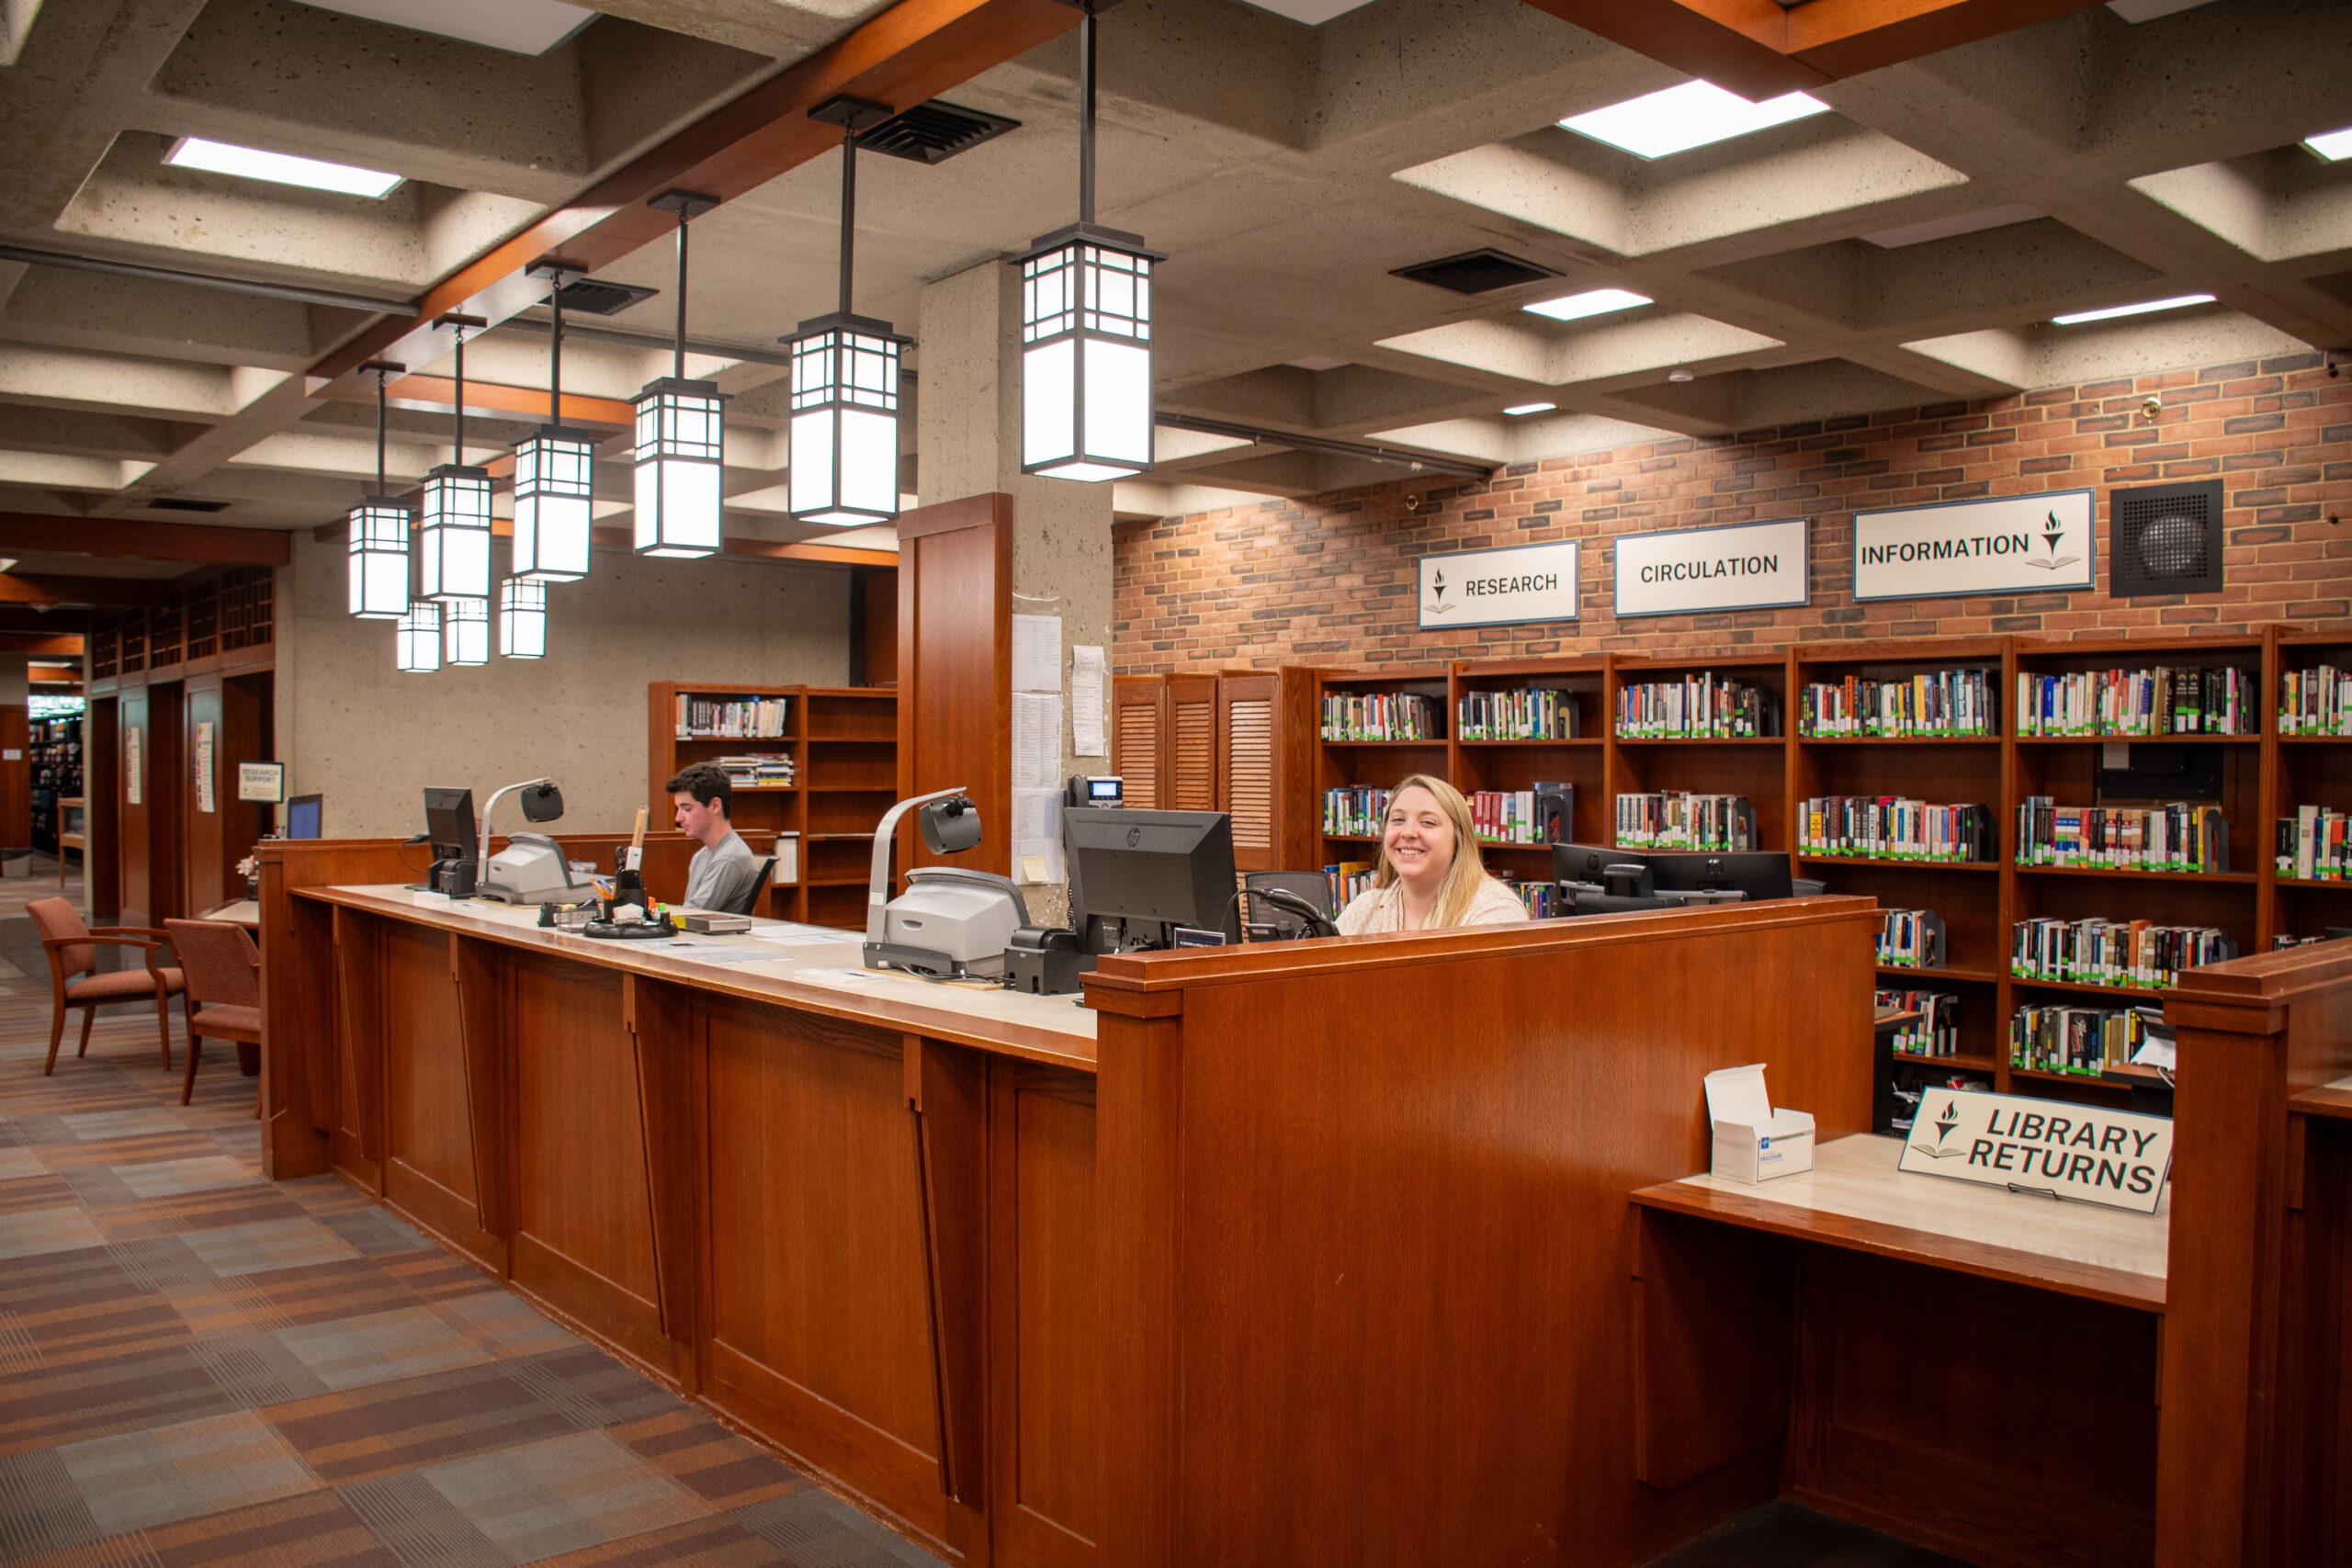 Two staff people working at the library circulation desk, with one smiling towards the viewer. There are signs for Library Returns, Research, Circulation, and Information. The circulation desk contains computers, scanners, and other office tools. Behind the staff people are shelves of books.